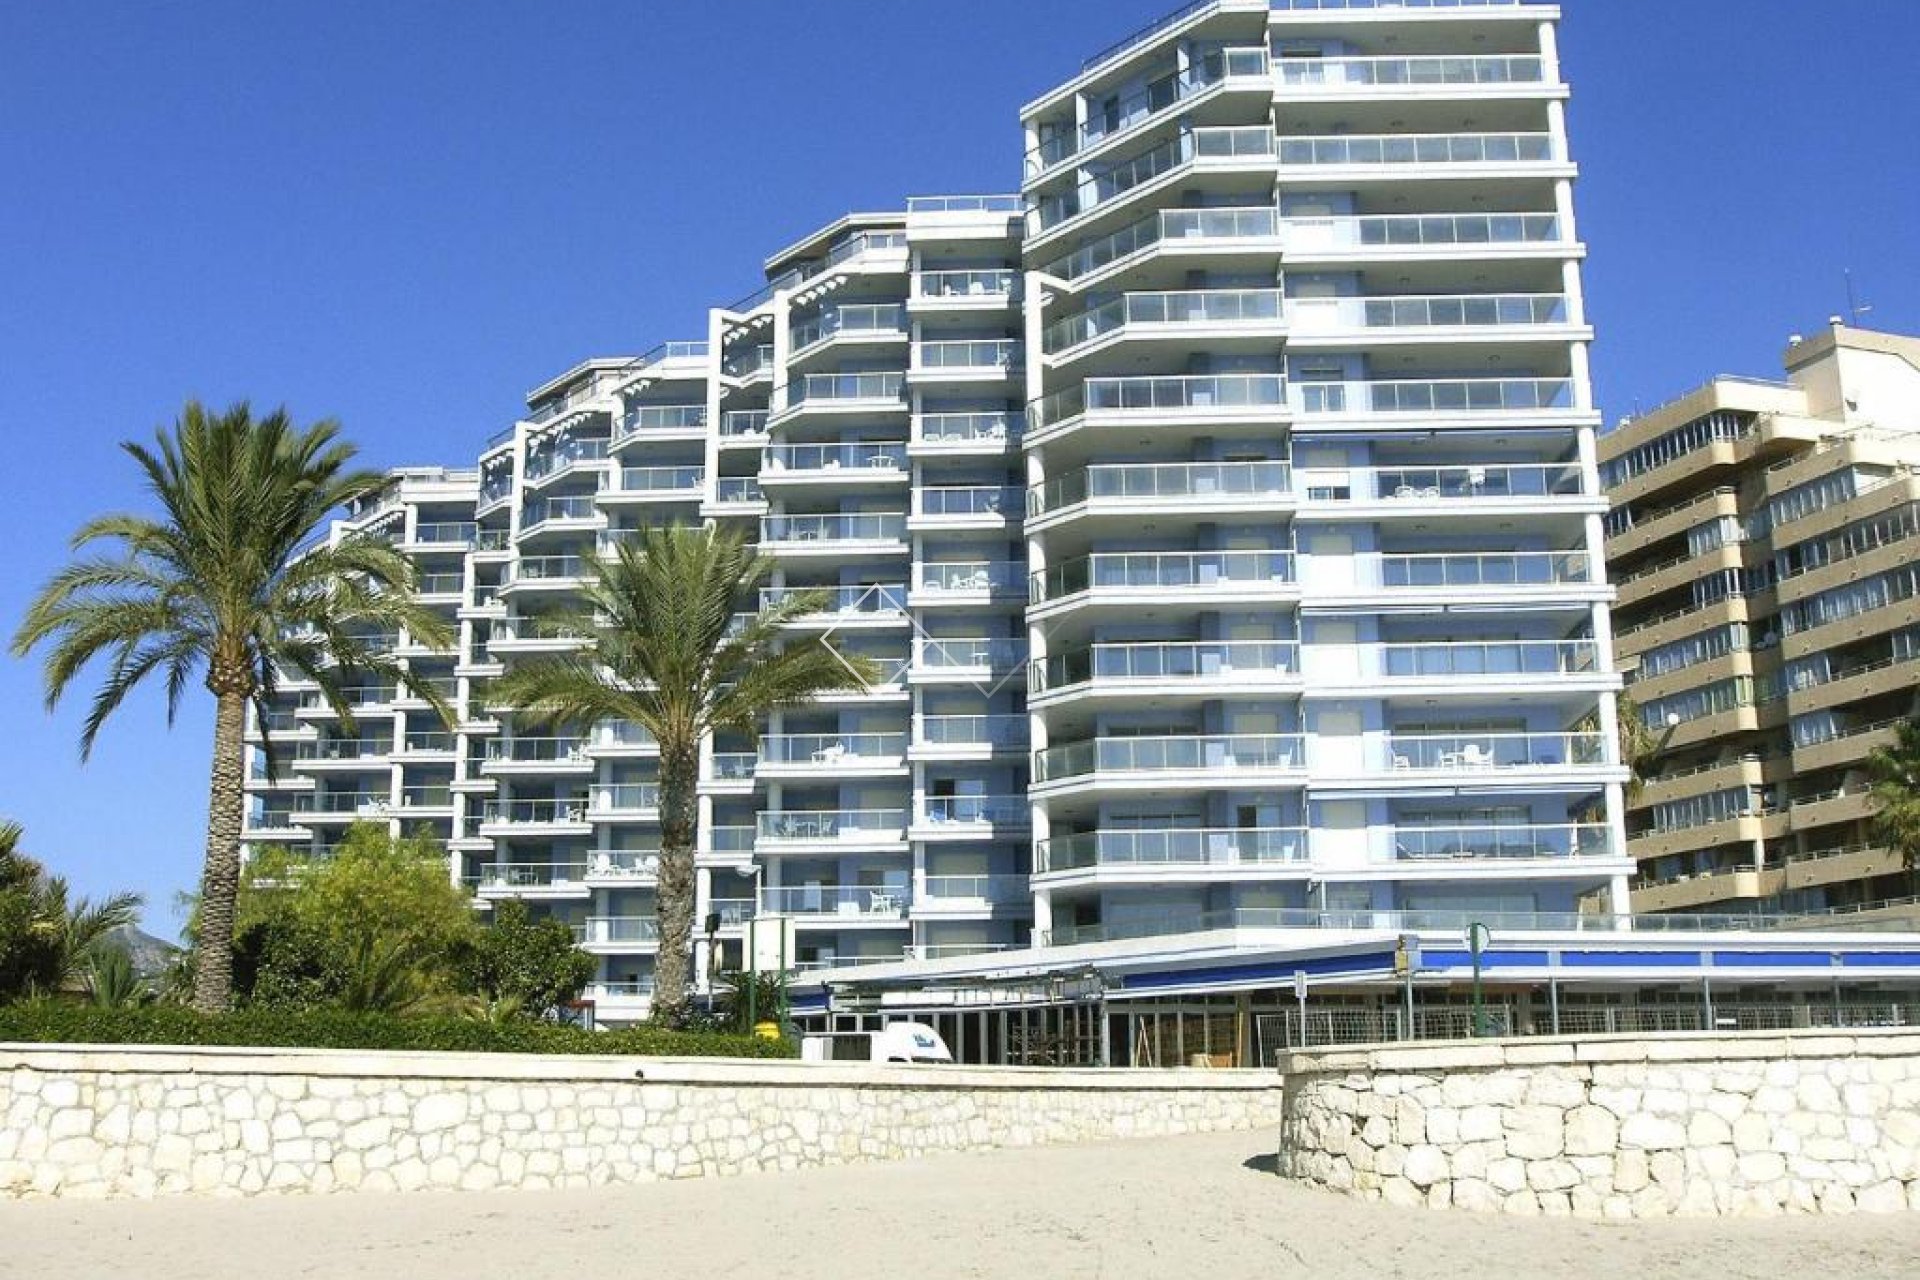 Duplex sea view penthouse for sale in Calpe